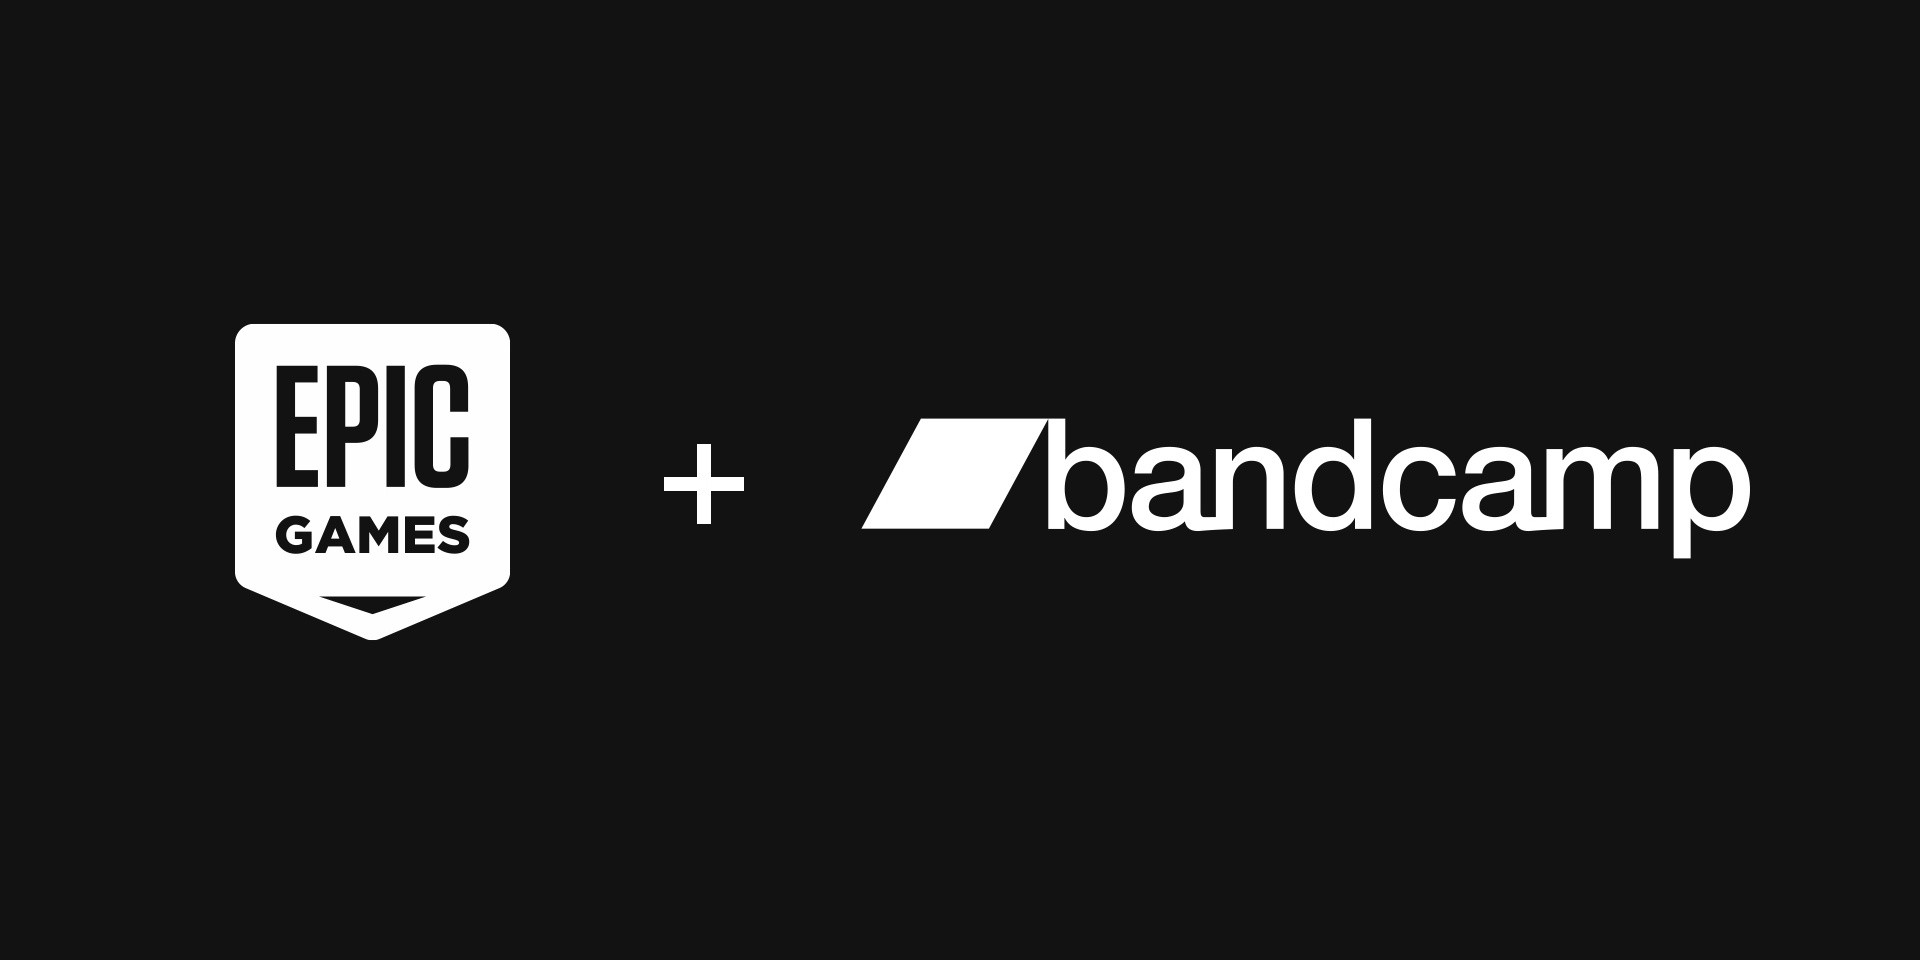 Bandcamp joins Epic Games: "We share a vision of building the most open, artist-friendly ecosystem in the world."